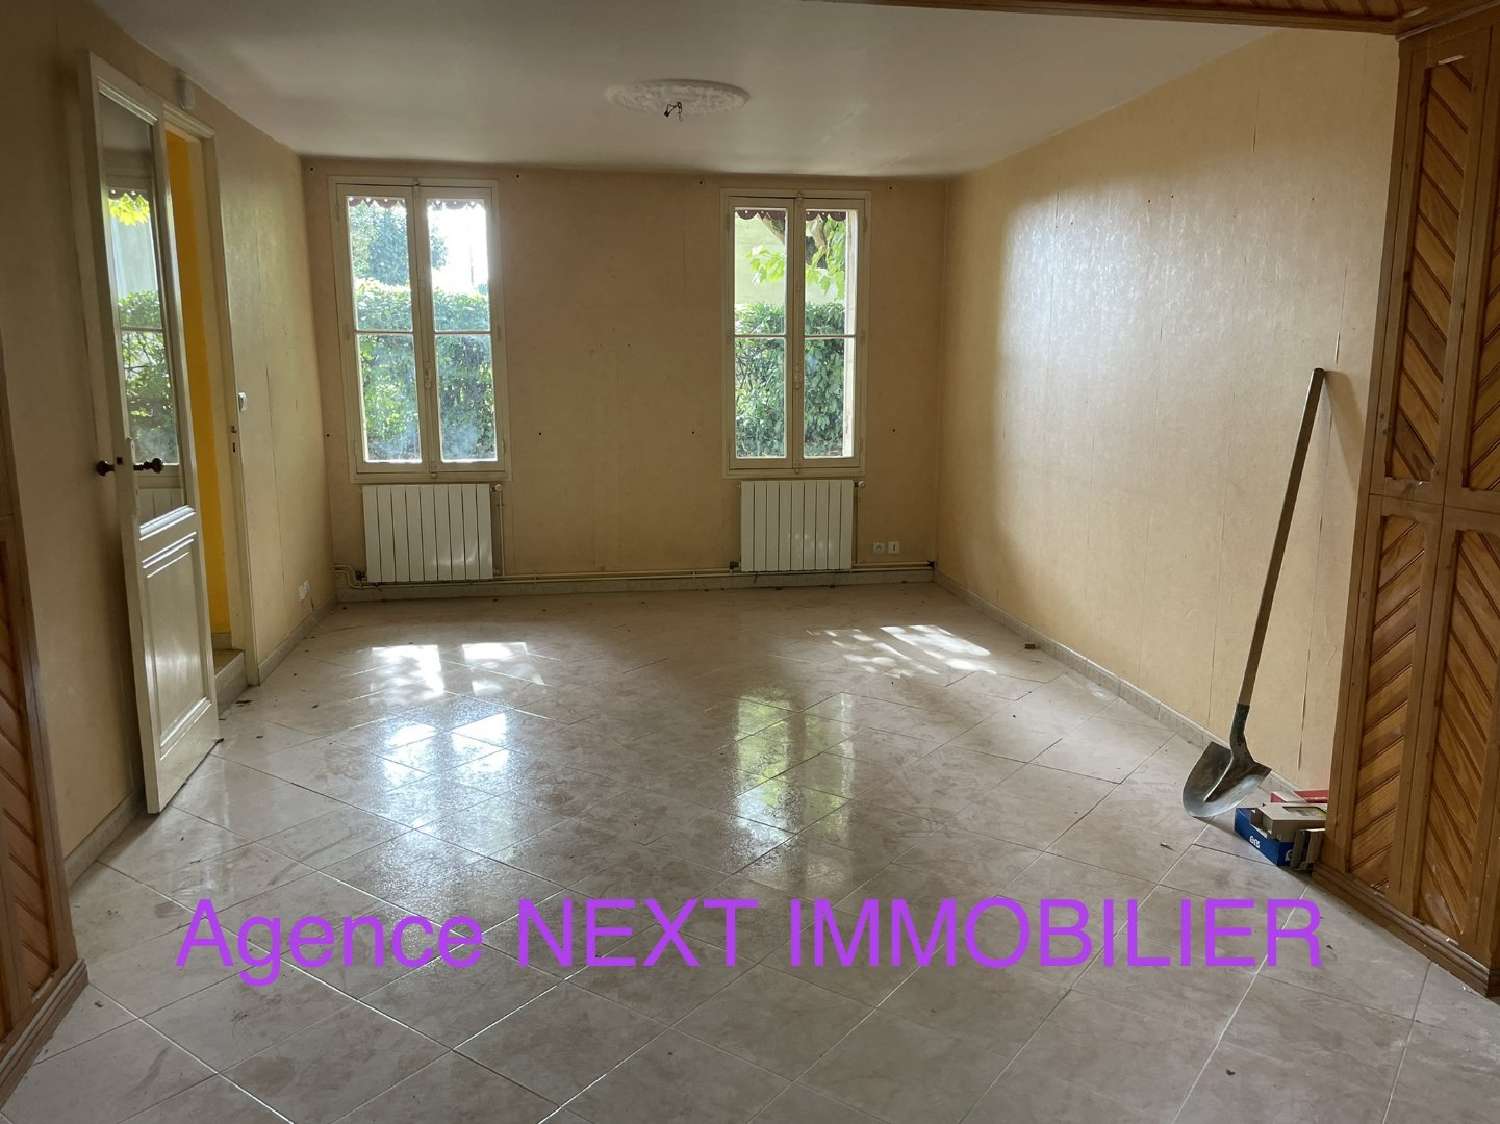  for sale apartment Libourne Gironde 3